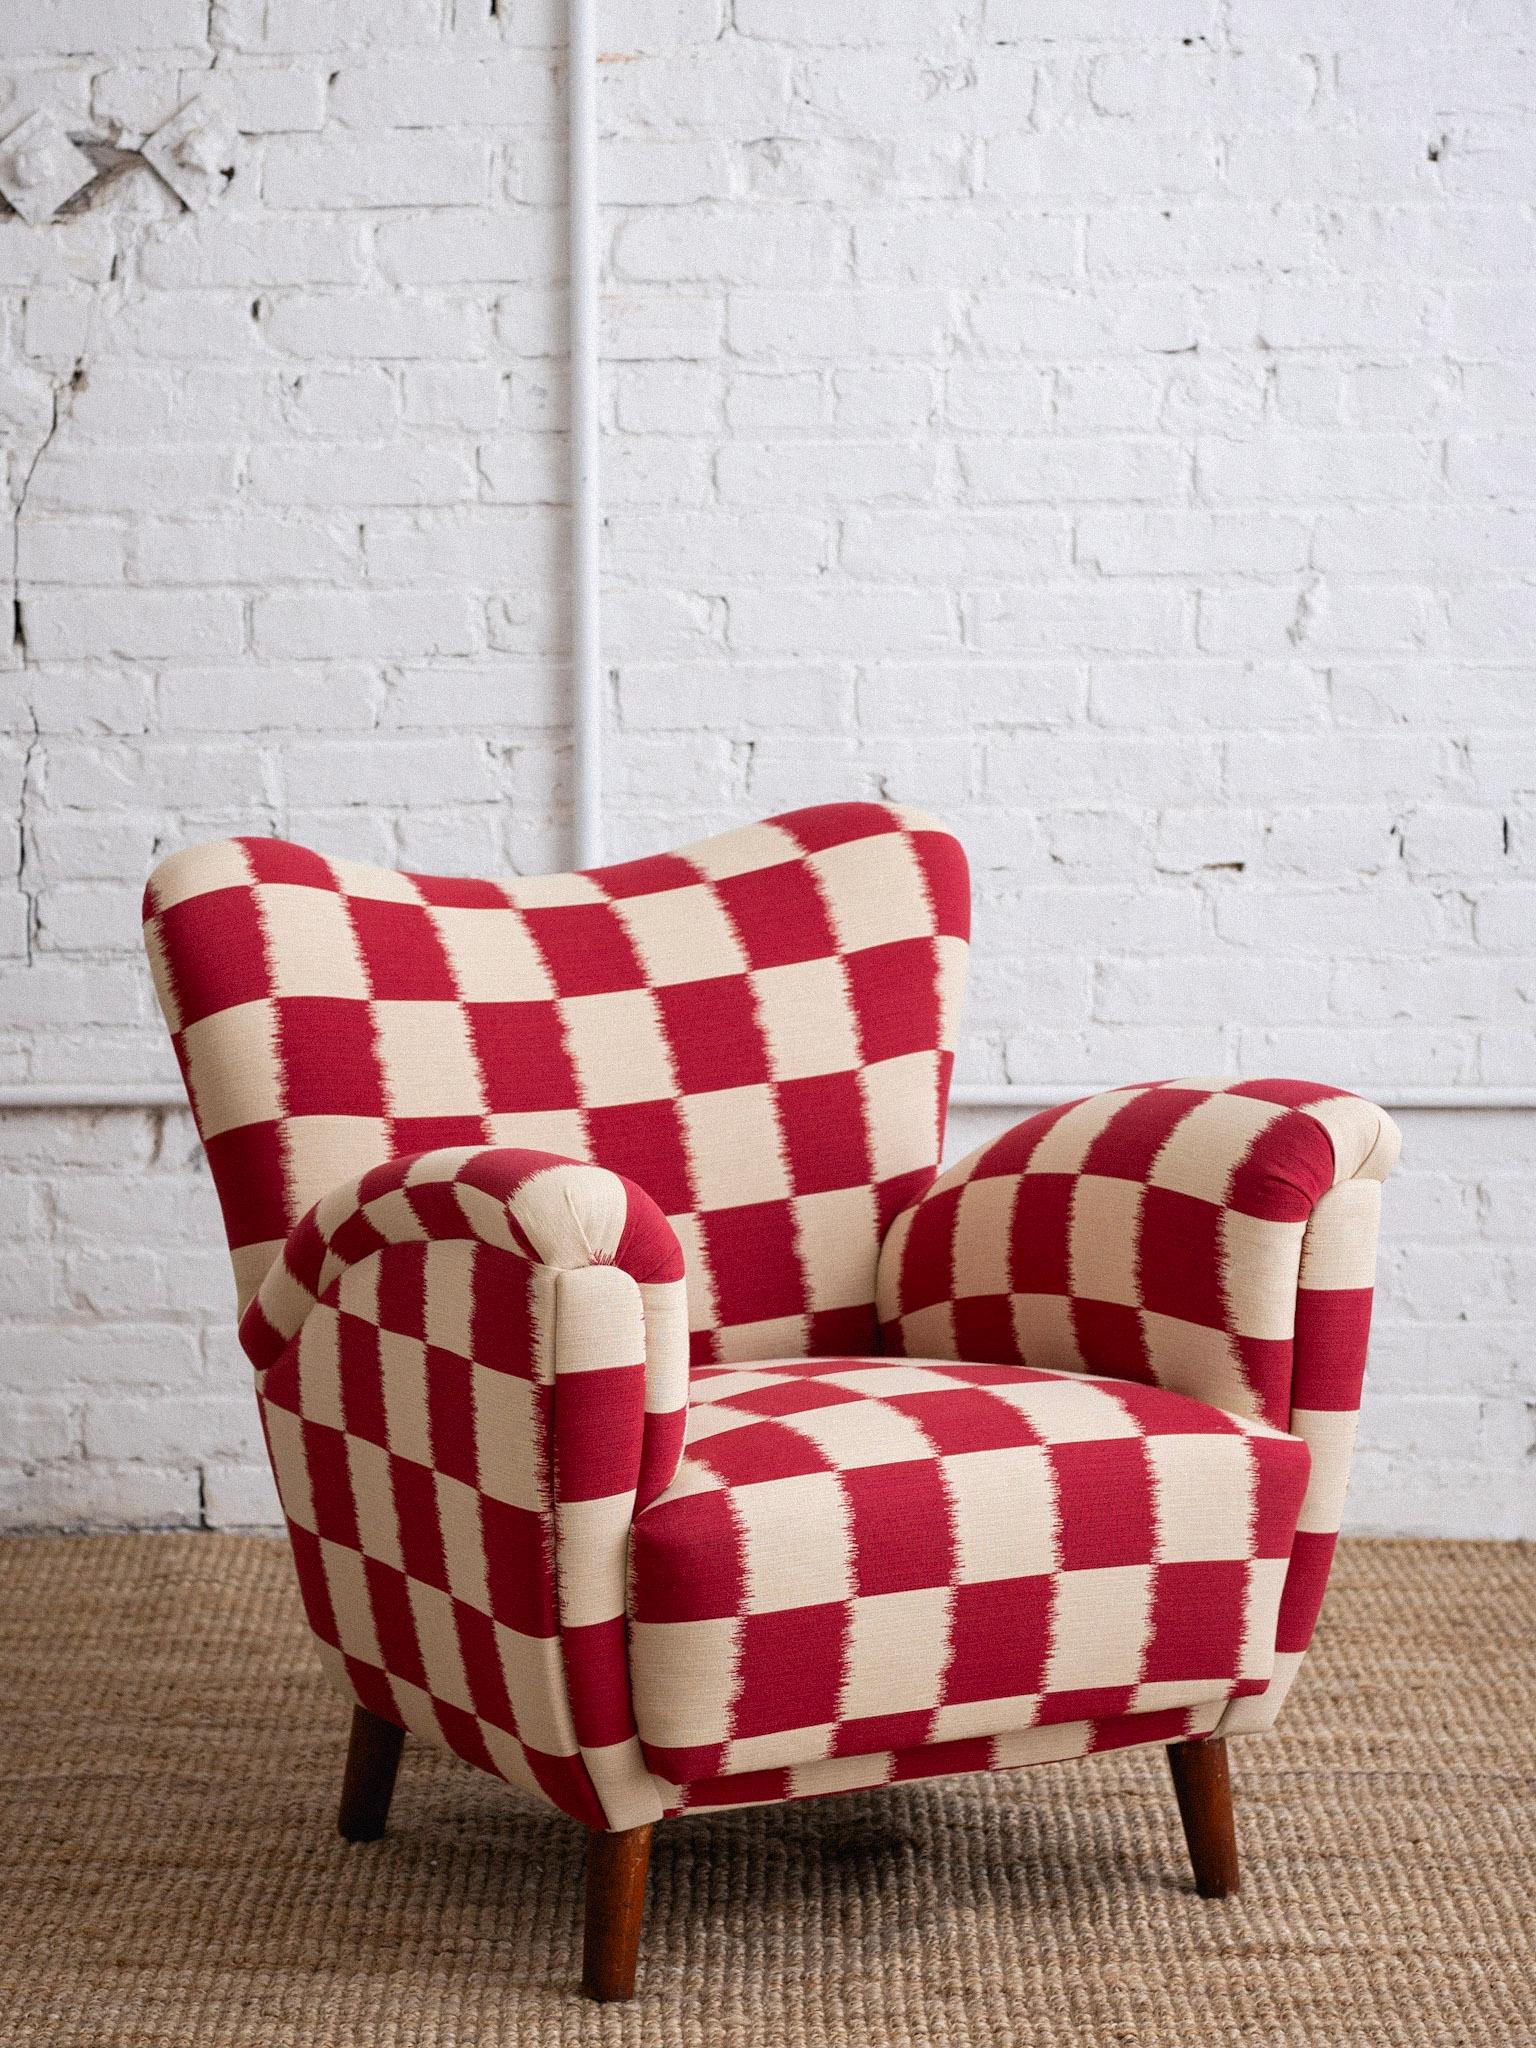 A mid century Italian chair. Low profile and wingback style silhouette. Newly reupholstered in a red and cream ikat checkered jacquard. Sourced outside of Florence, Italy. Matching sofa also available, sold separately.